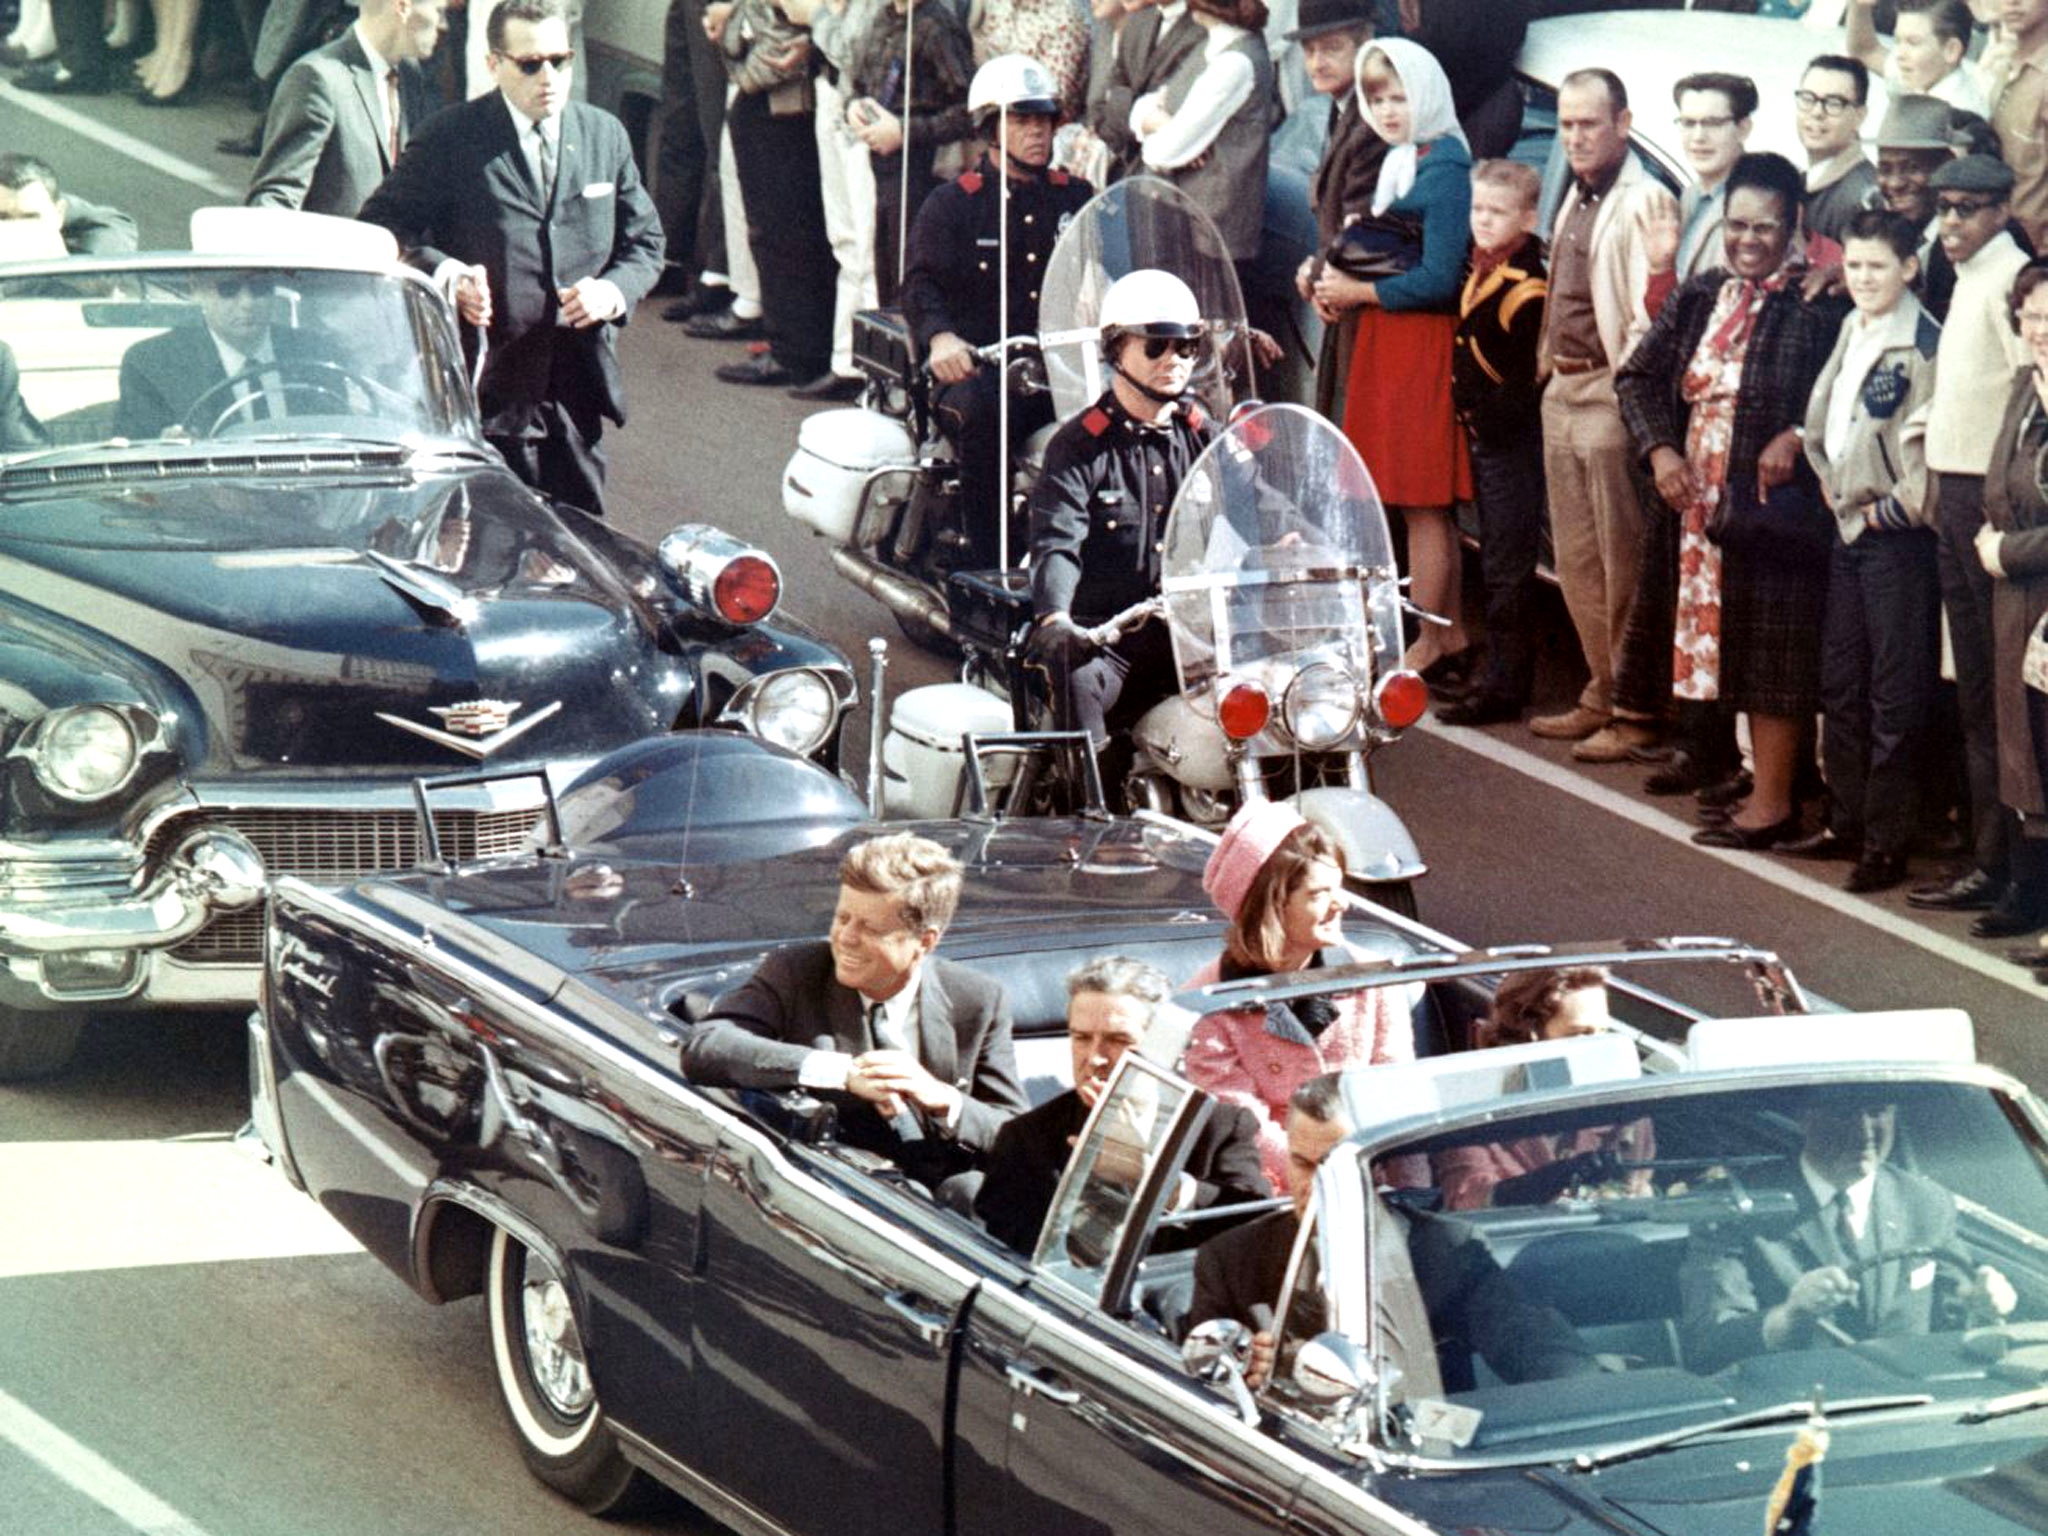 JFK and his wife Jackie ride in the motorcade shortly before his assassination